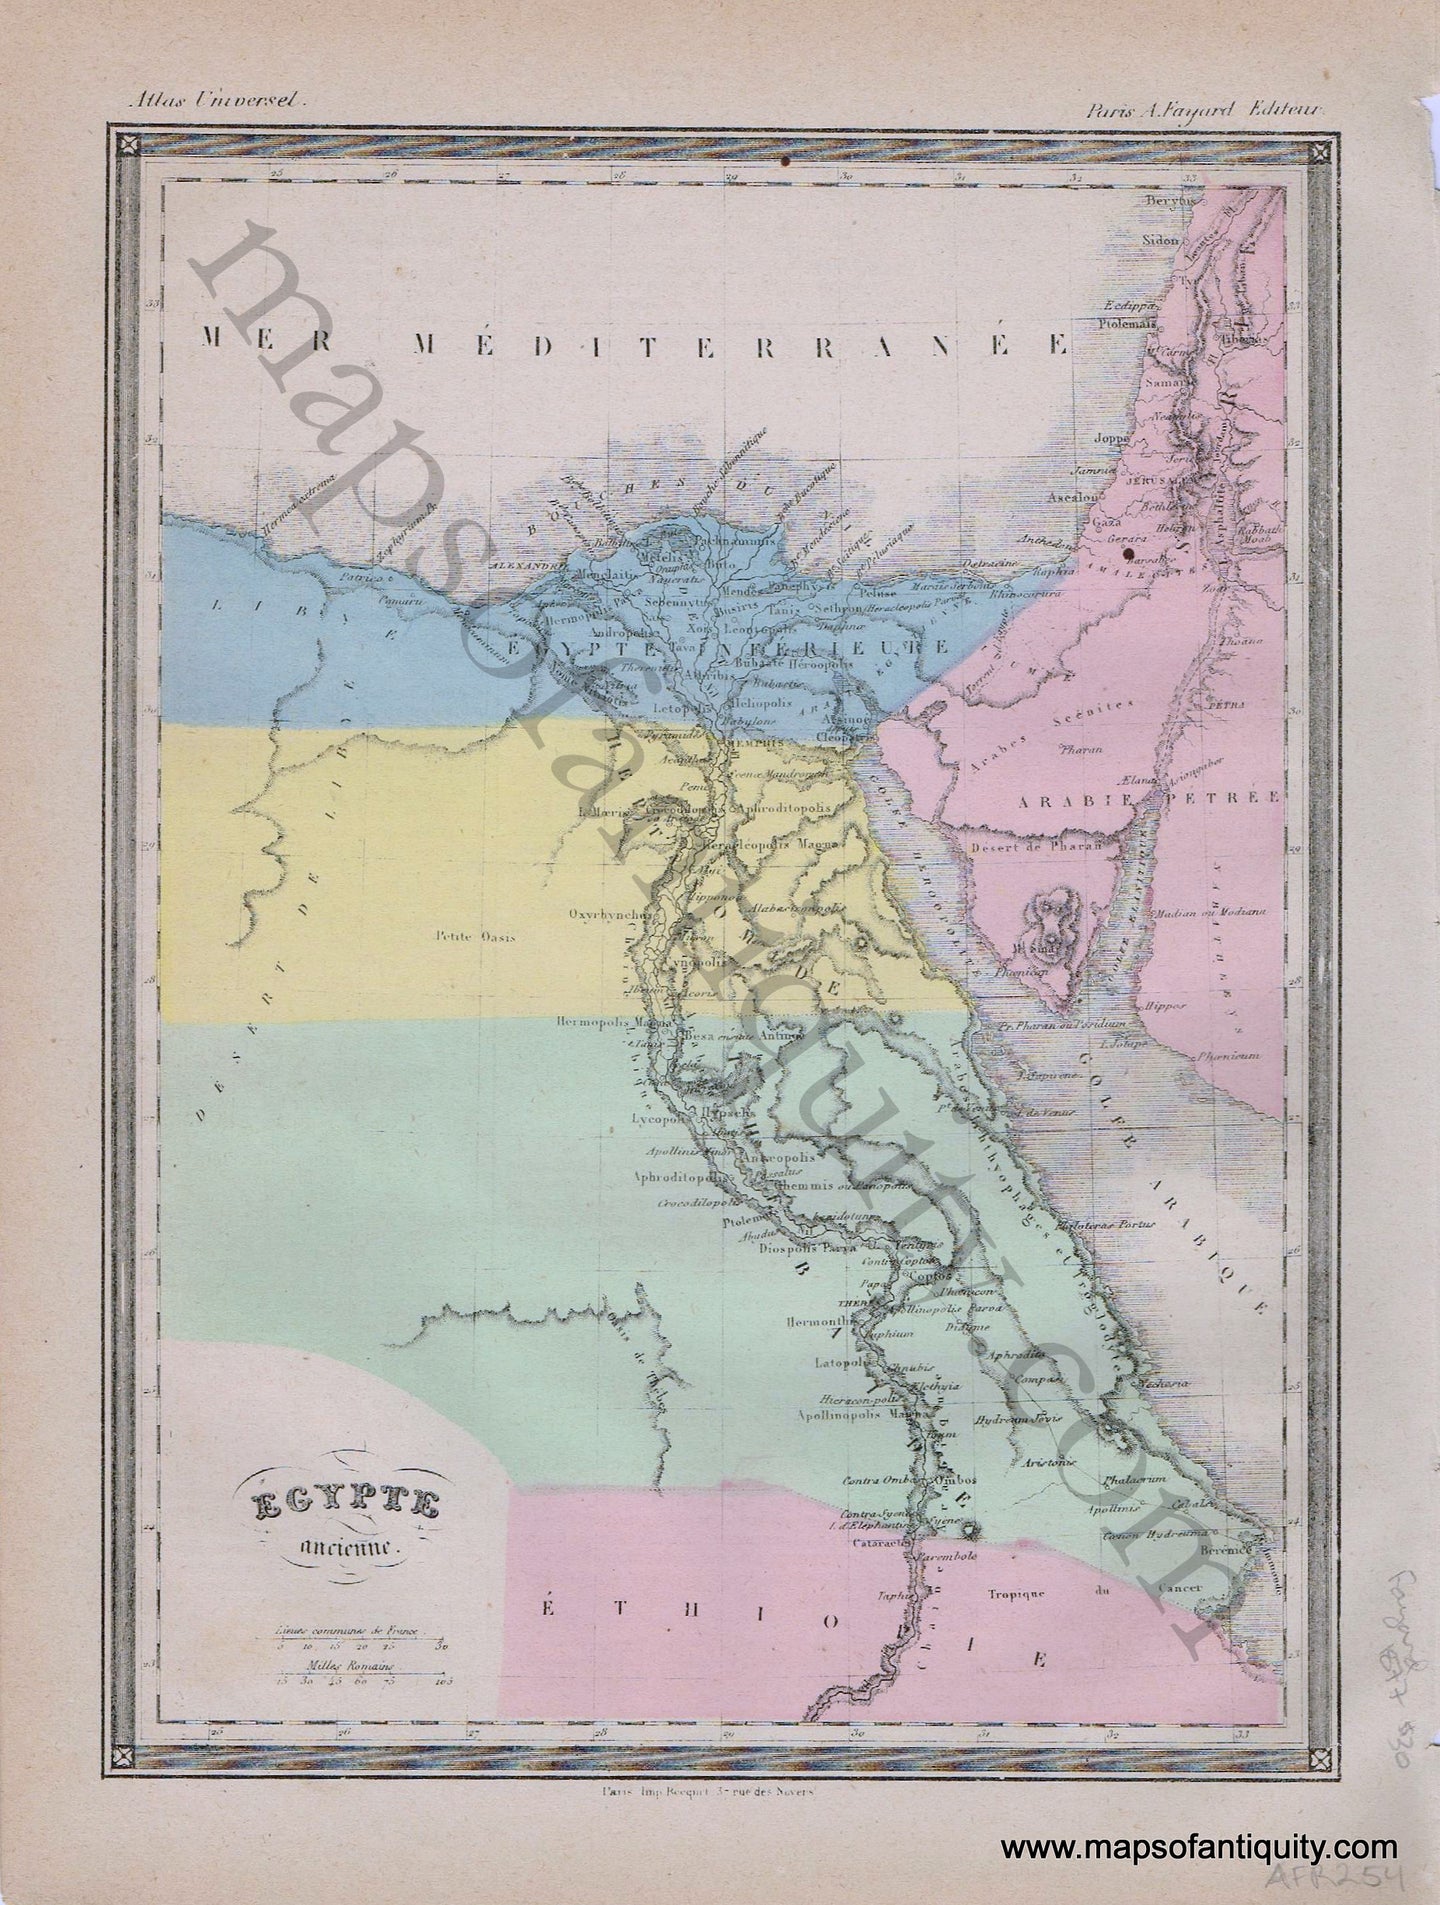 Antique-Printed-Color-Map-Africa-Egypte-Ancienne---Ancient-Egypt-1877-Fayard-Egypt-1800s-19th-century-Maps-of-Antiquity